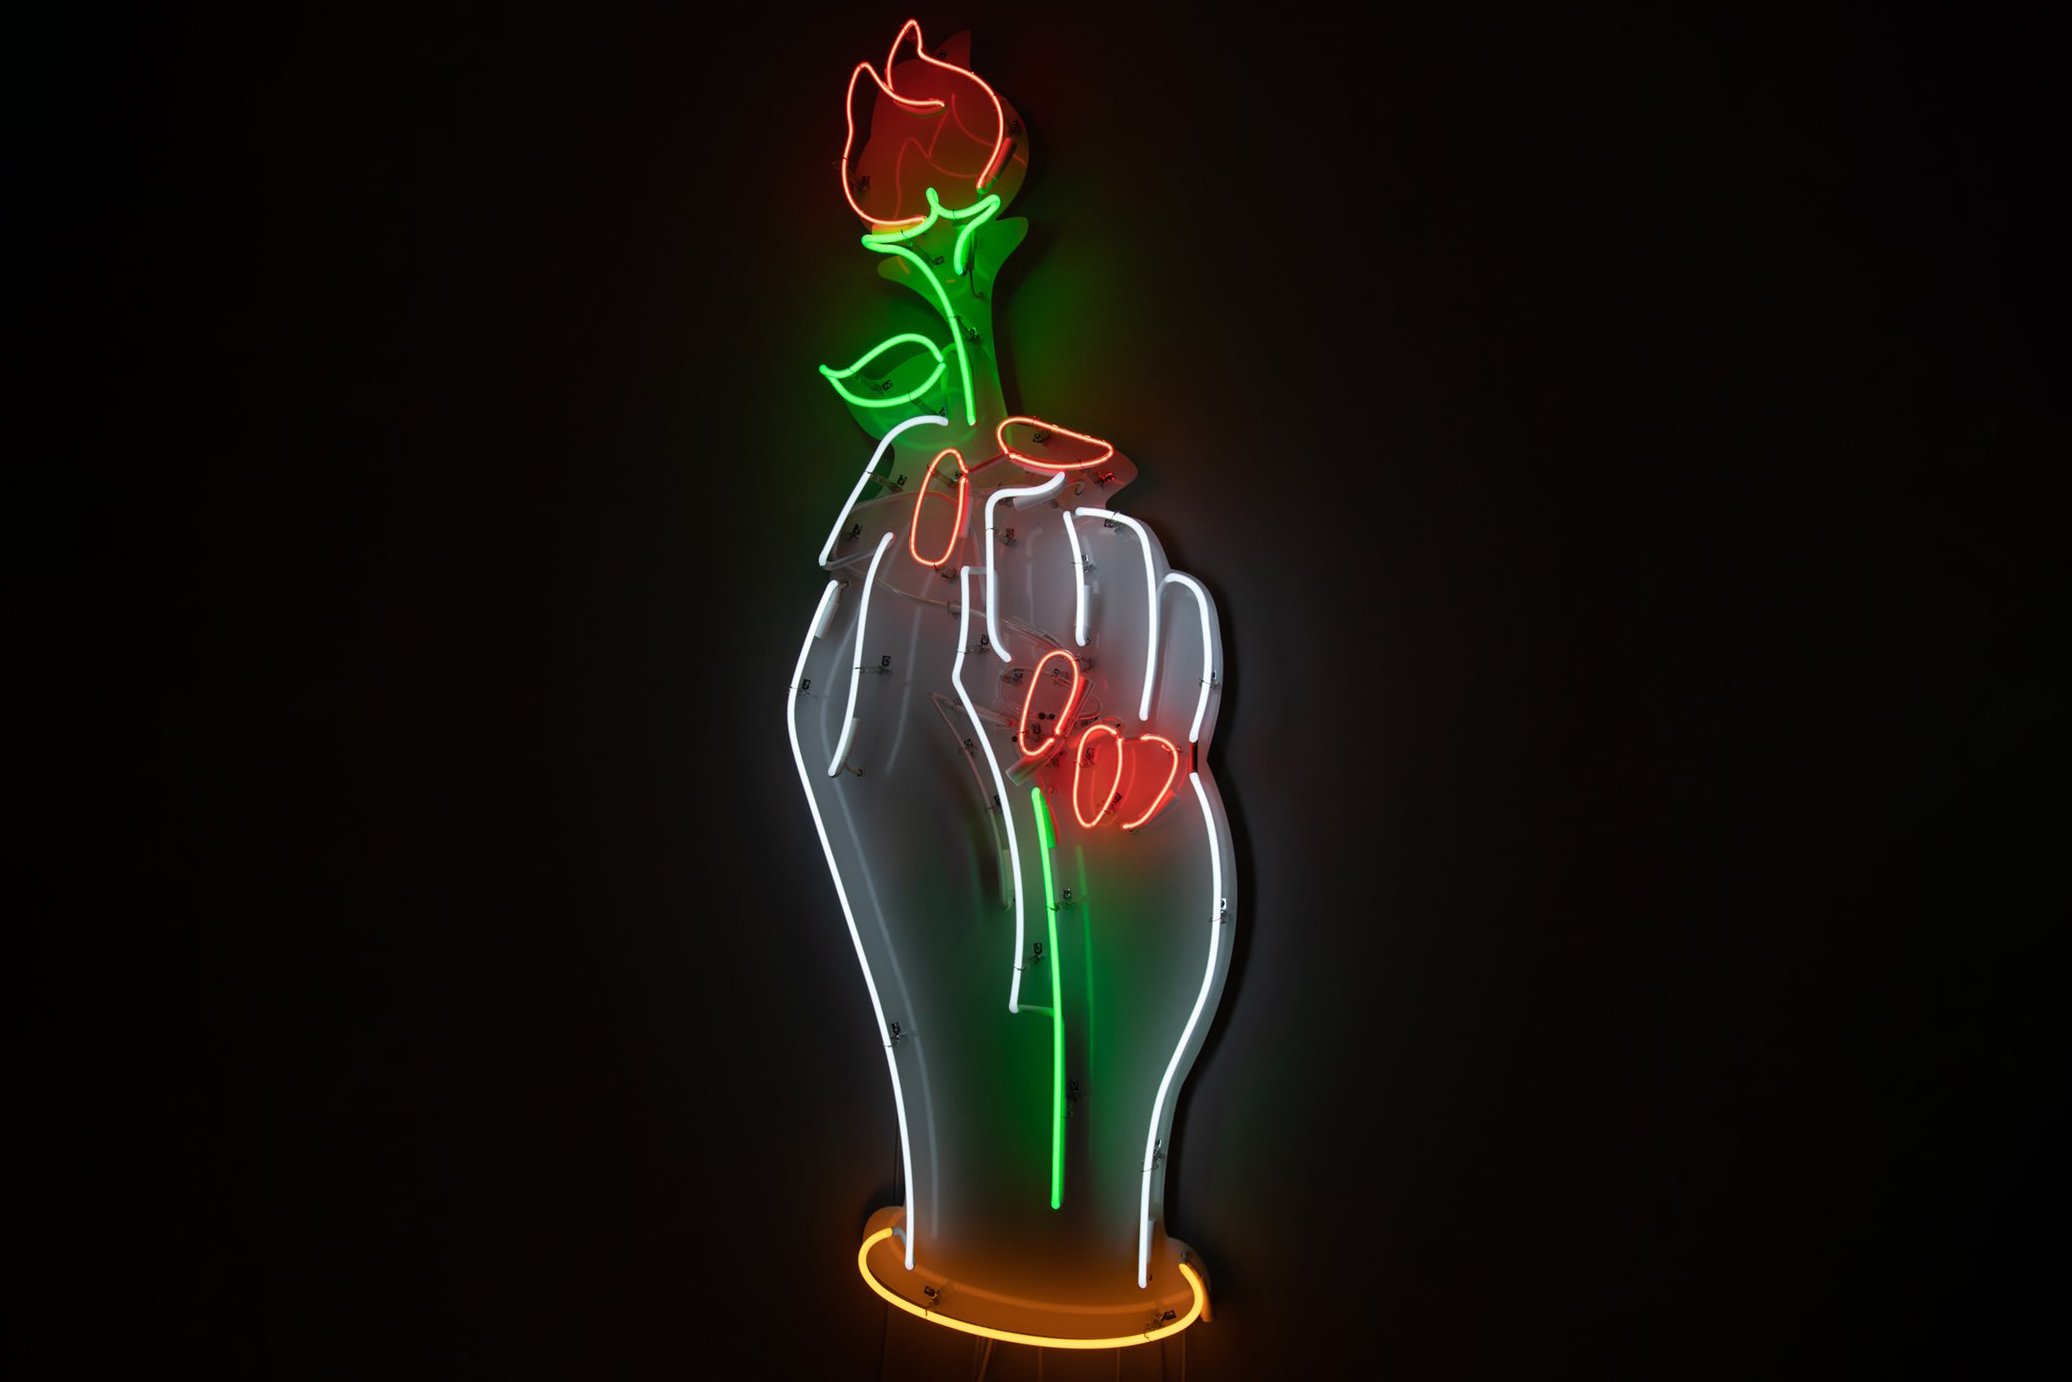 Neon sign of a hand holding a red rose